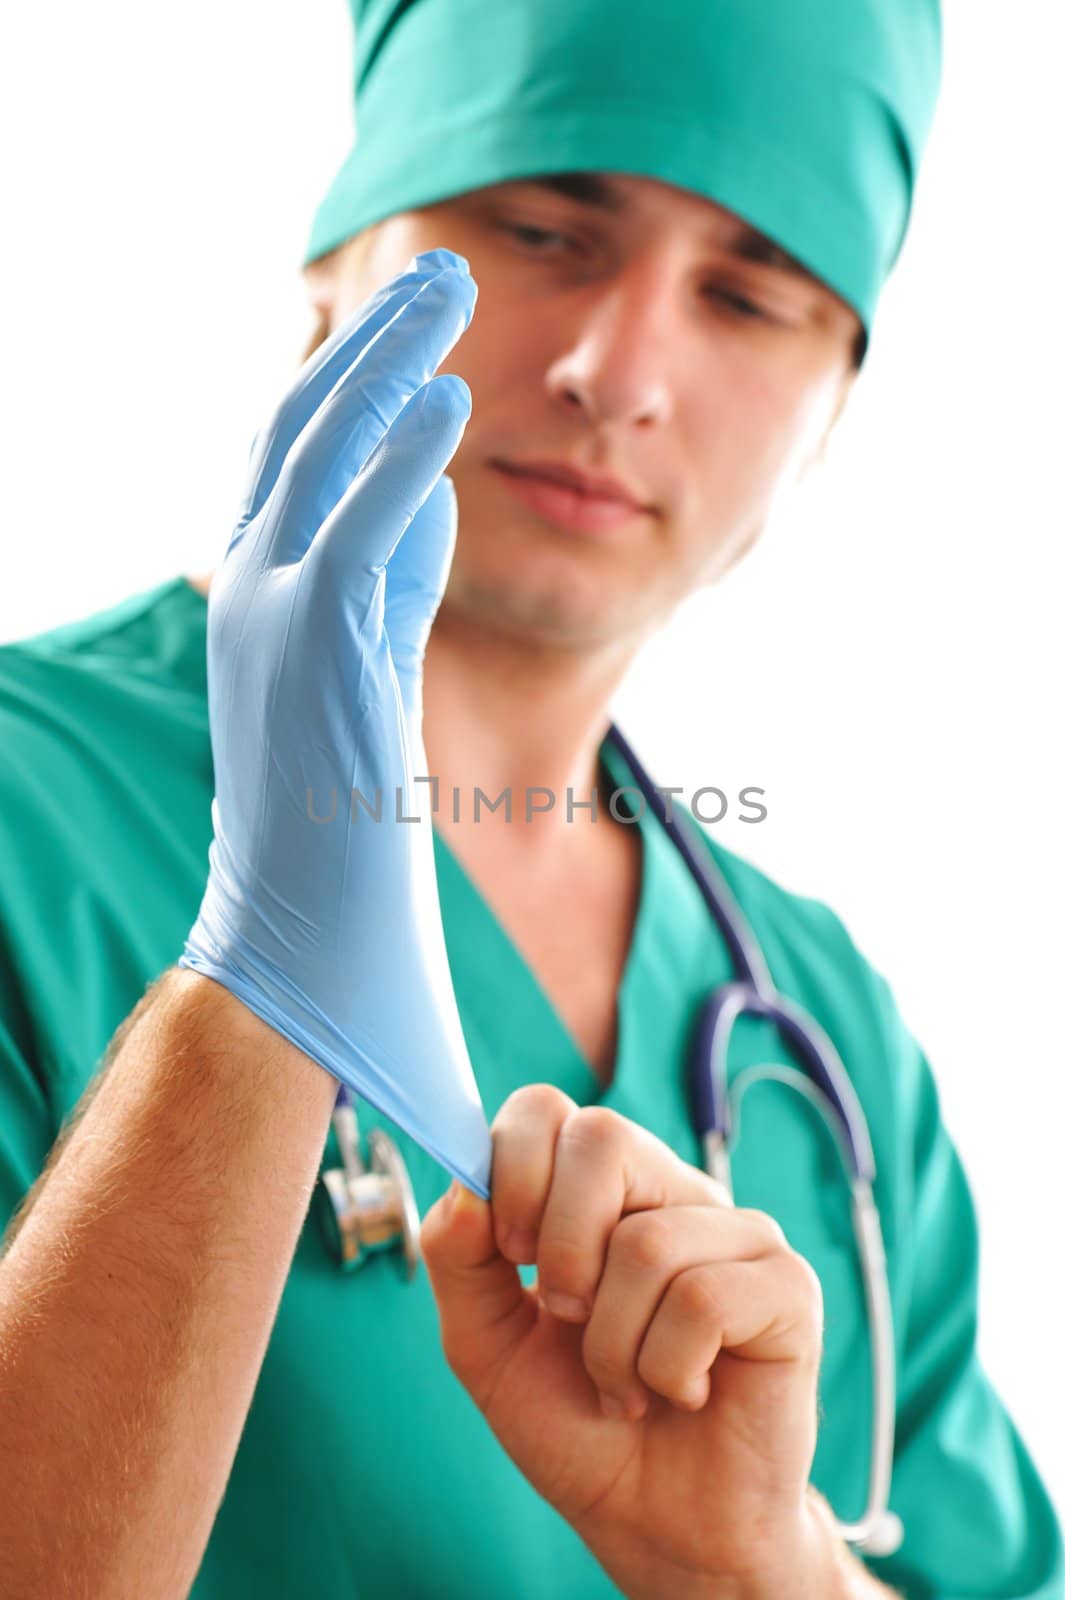 Pulling on surgical glove by haveseen